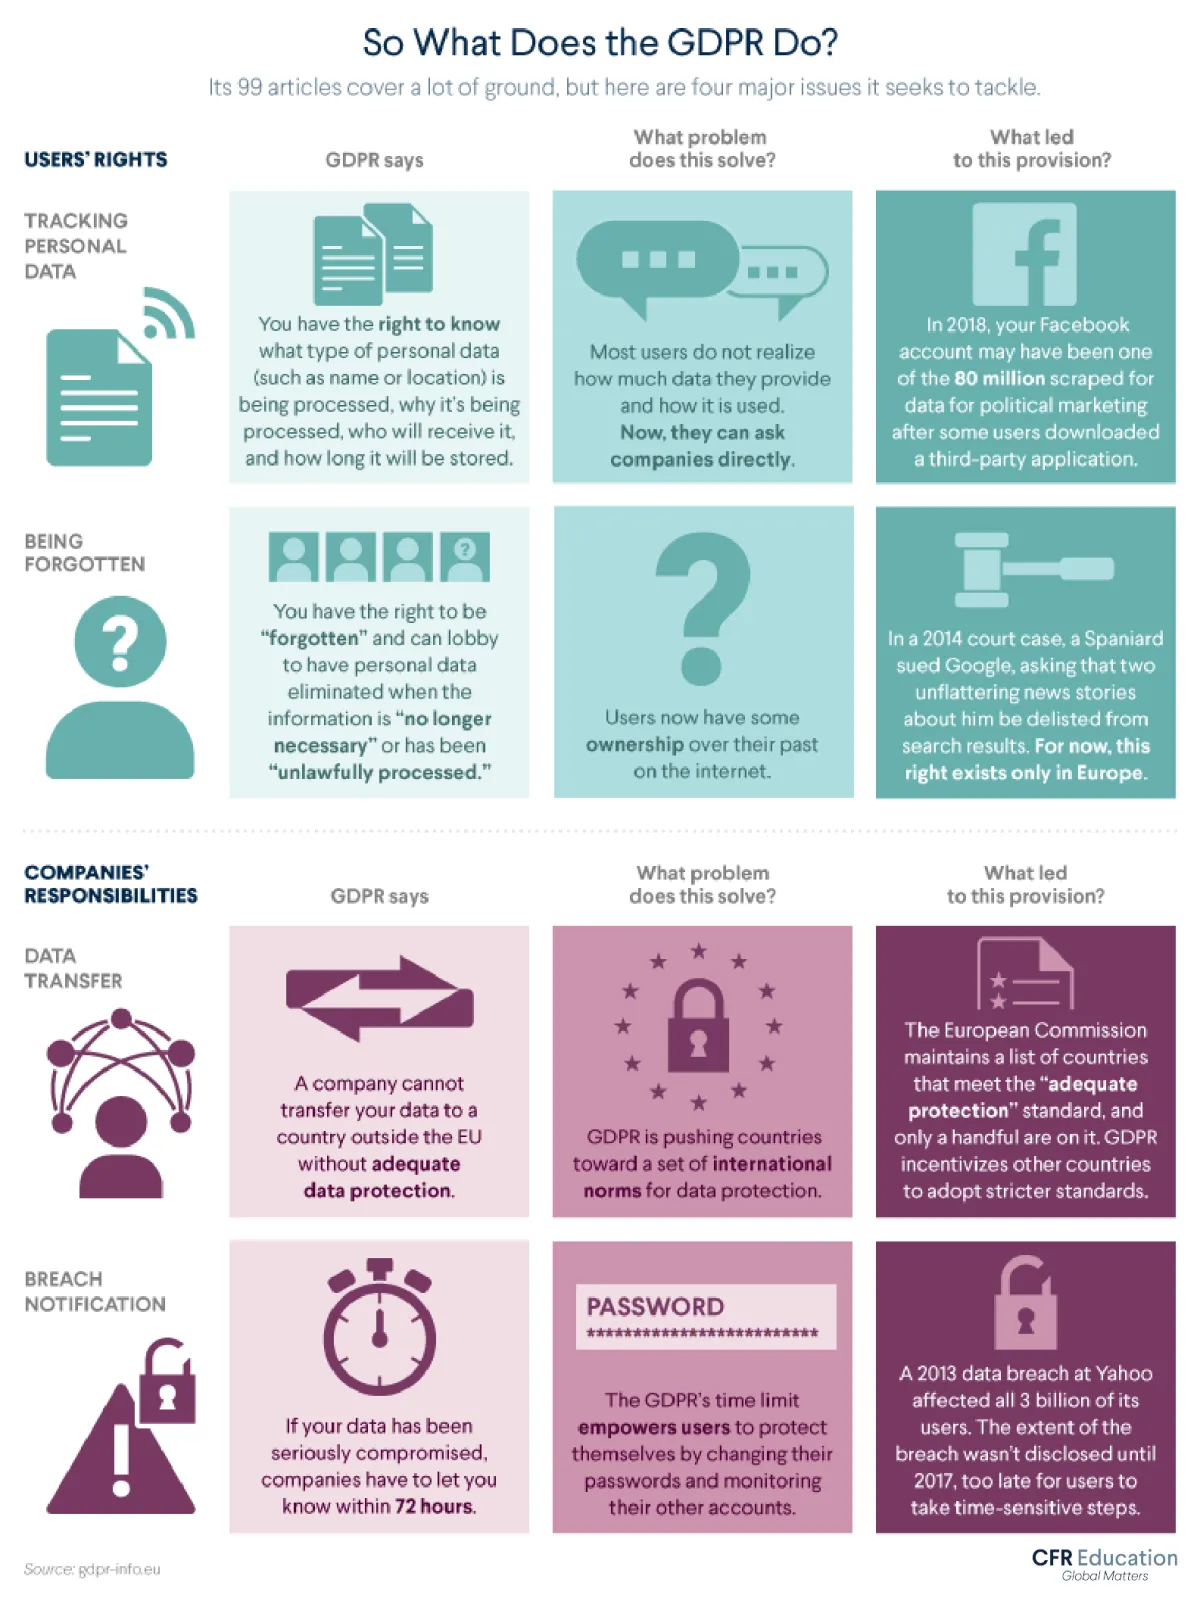 Infographic highlights various users' rights and companies' responsibilities per the GDPR. For more info contact us at cfr_education@cfr.org.